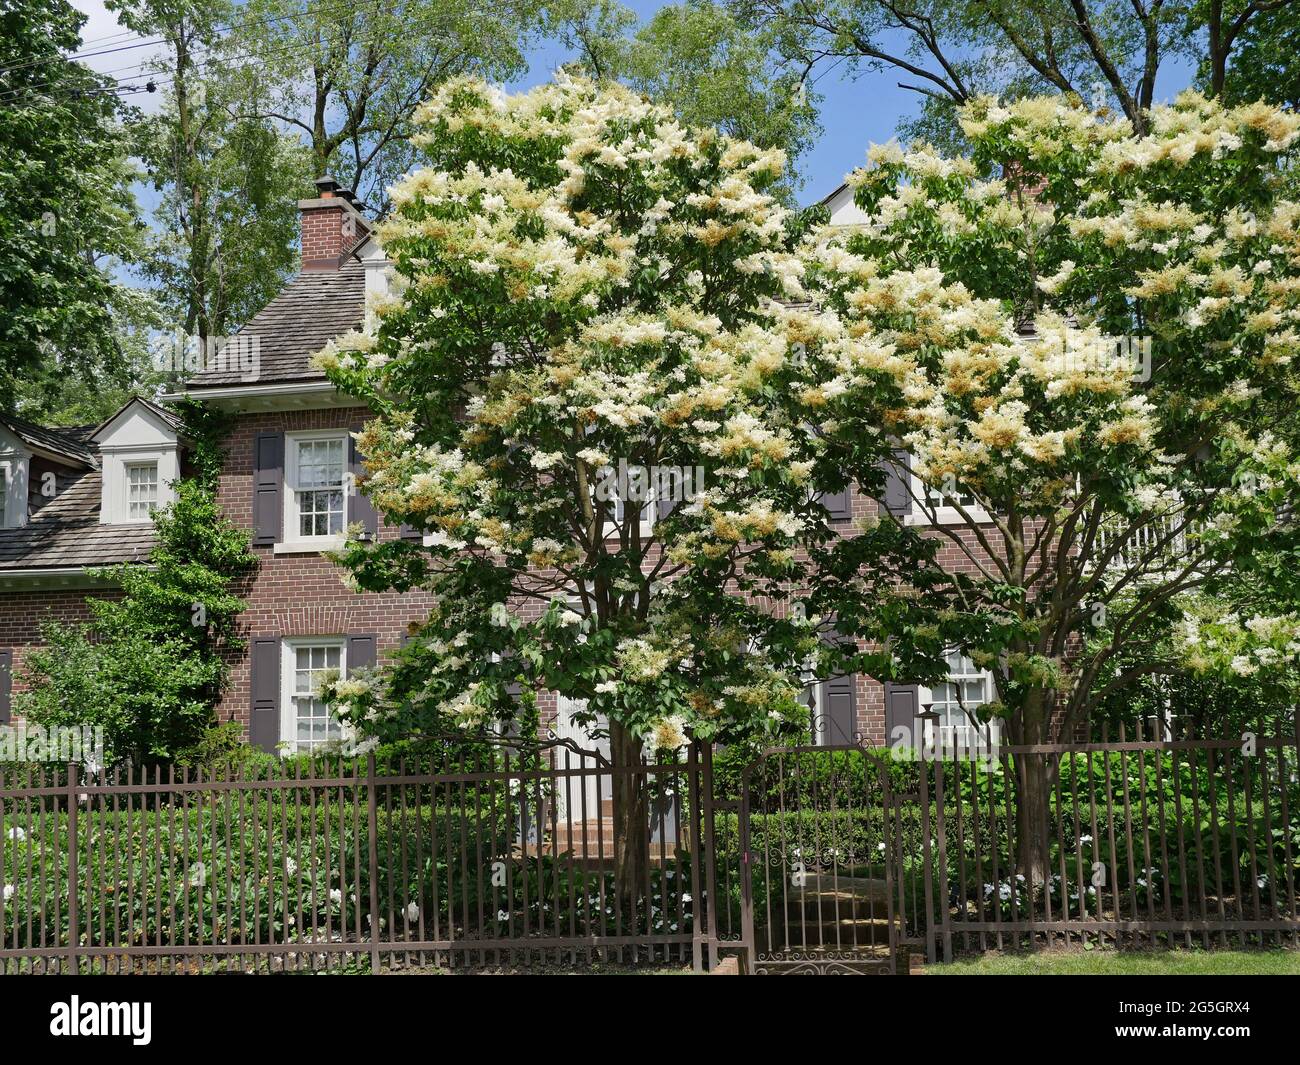 Traditional brick house with iron fence and two linden trees blooming in front garden Stock Photo